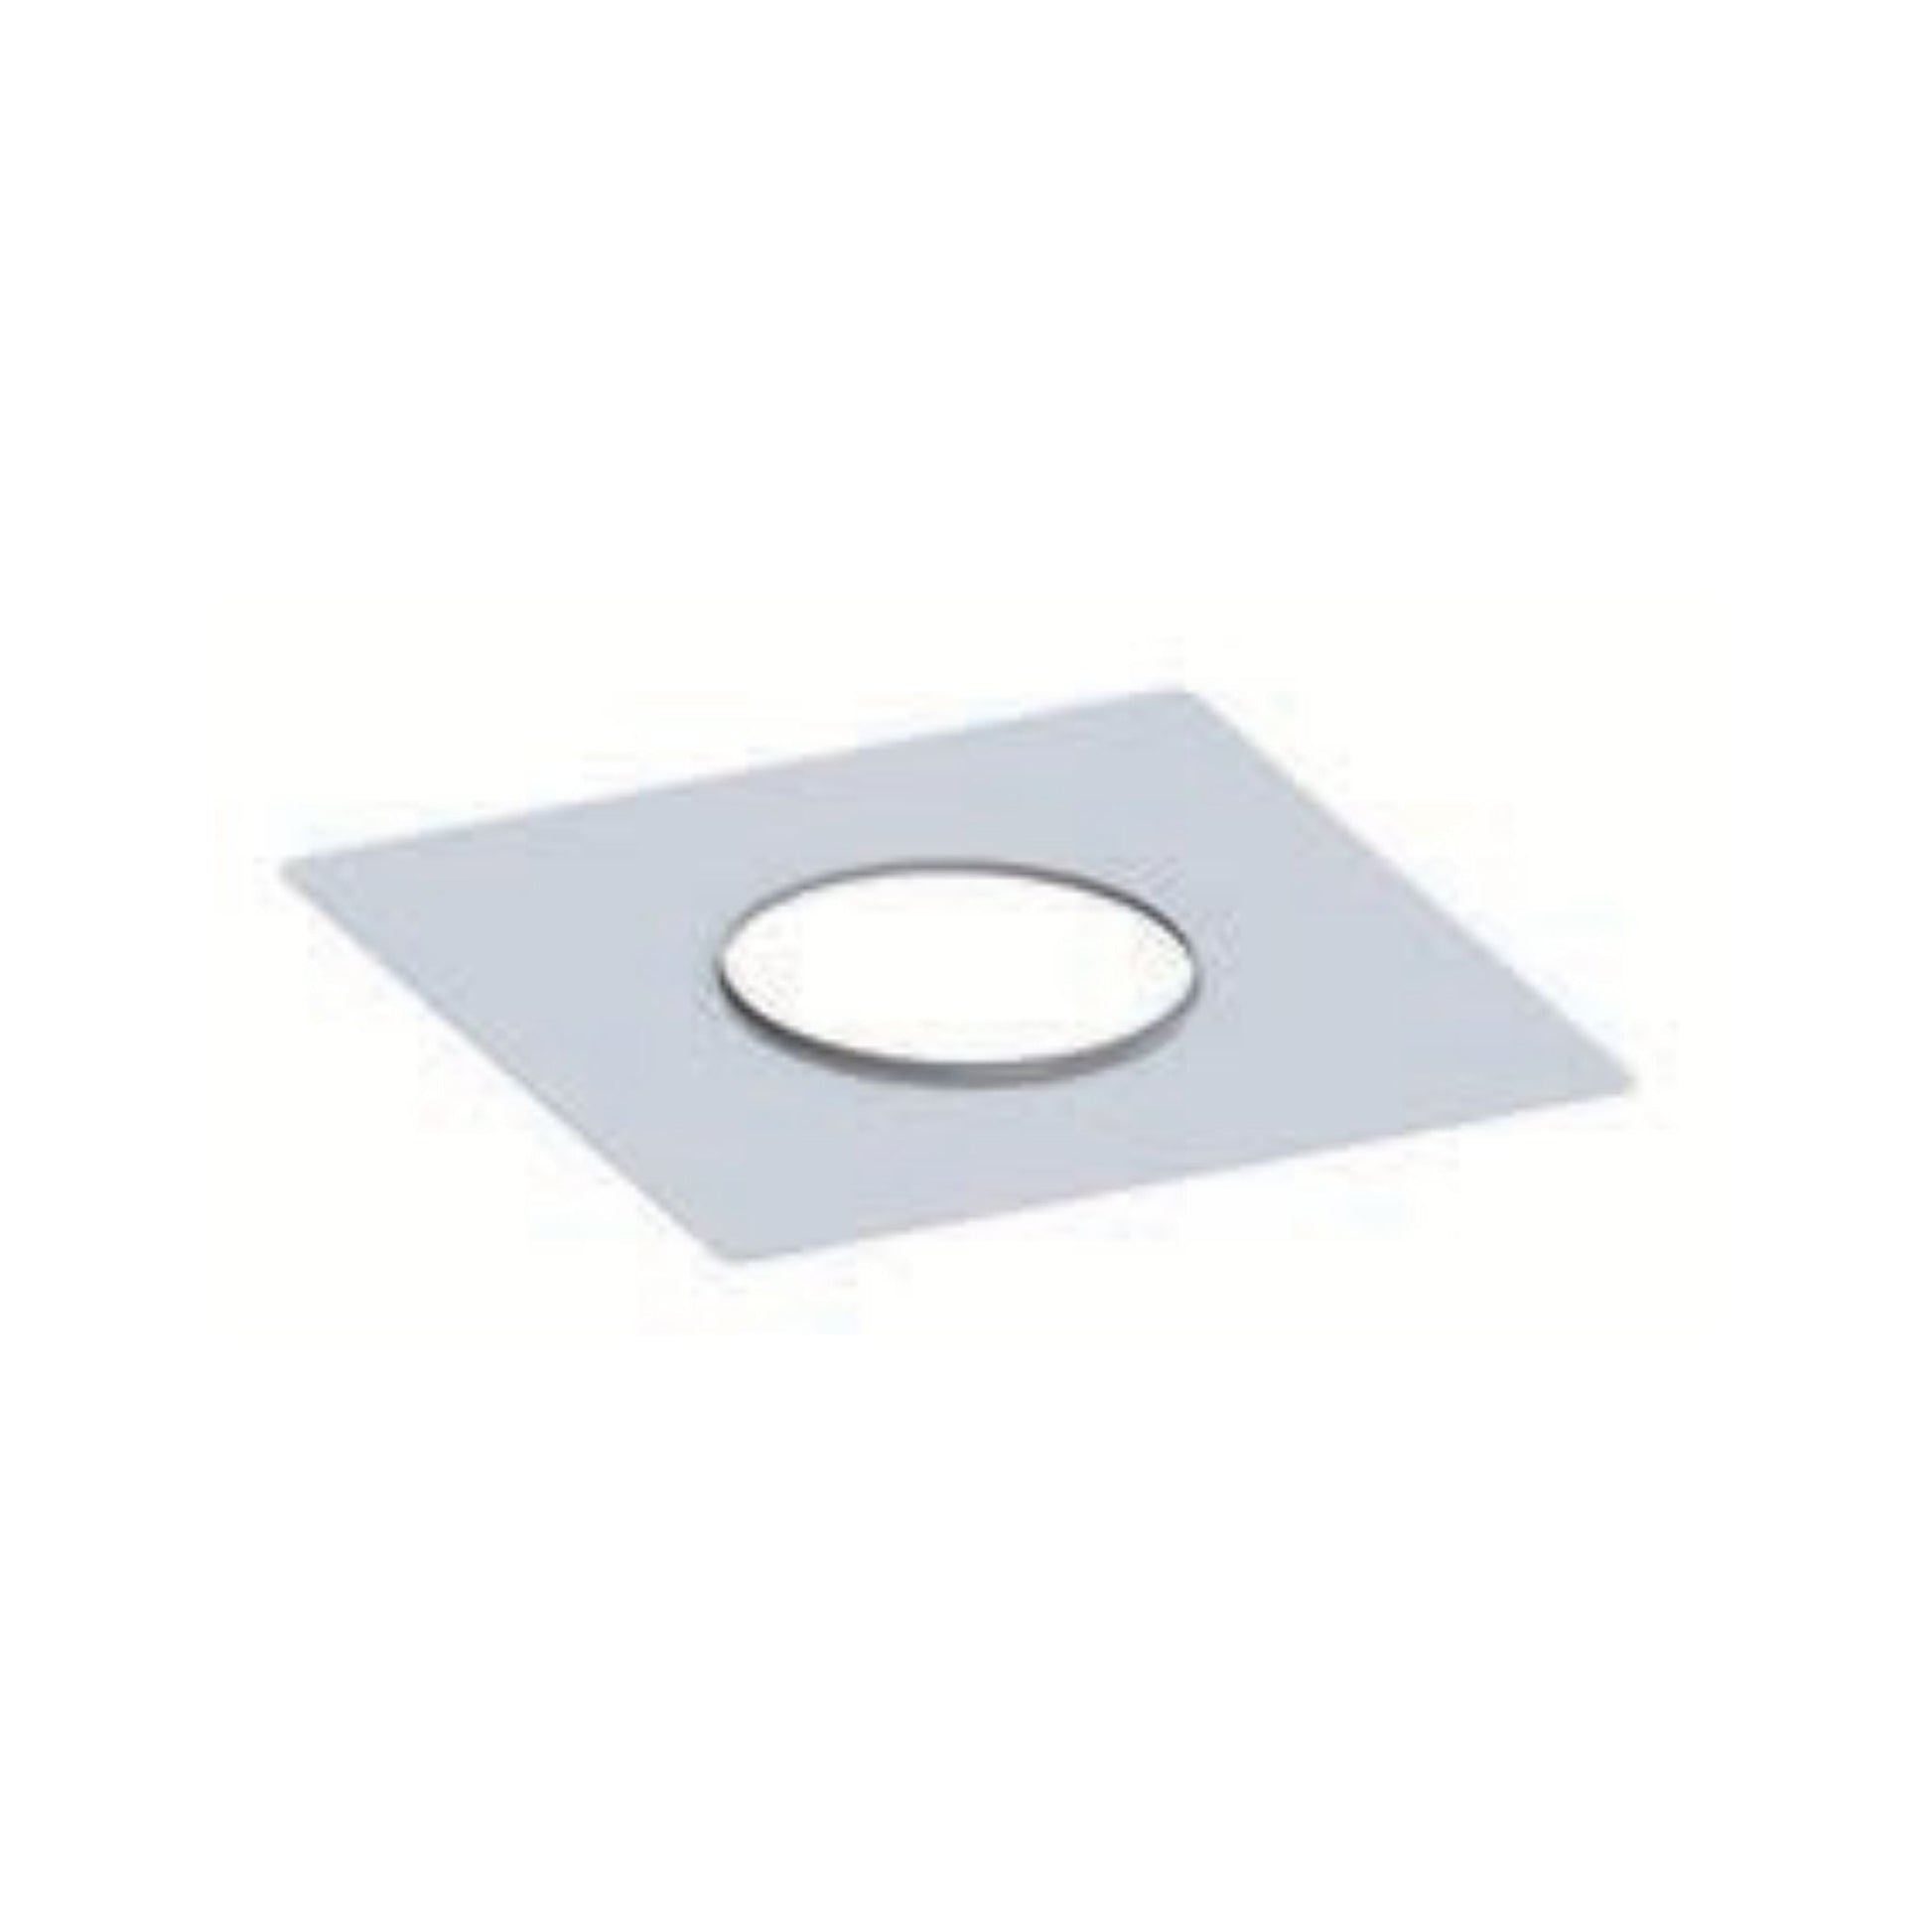 DuraVent FasNSeal Flex 5" Stainless Steel Top Cover Plate